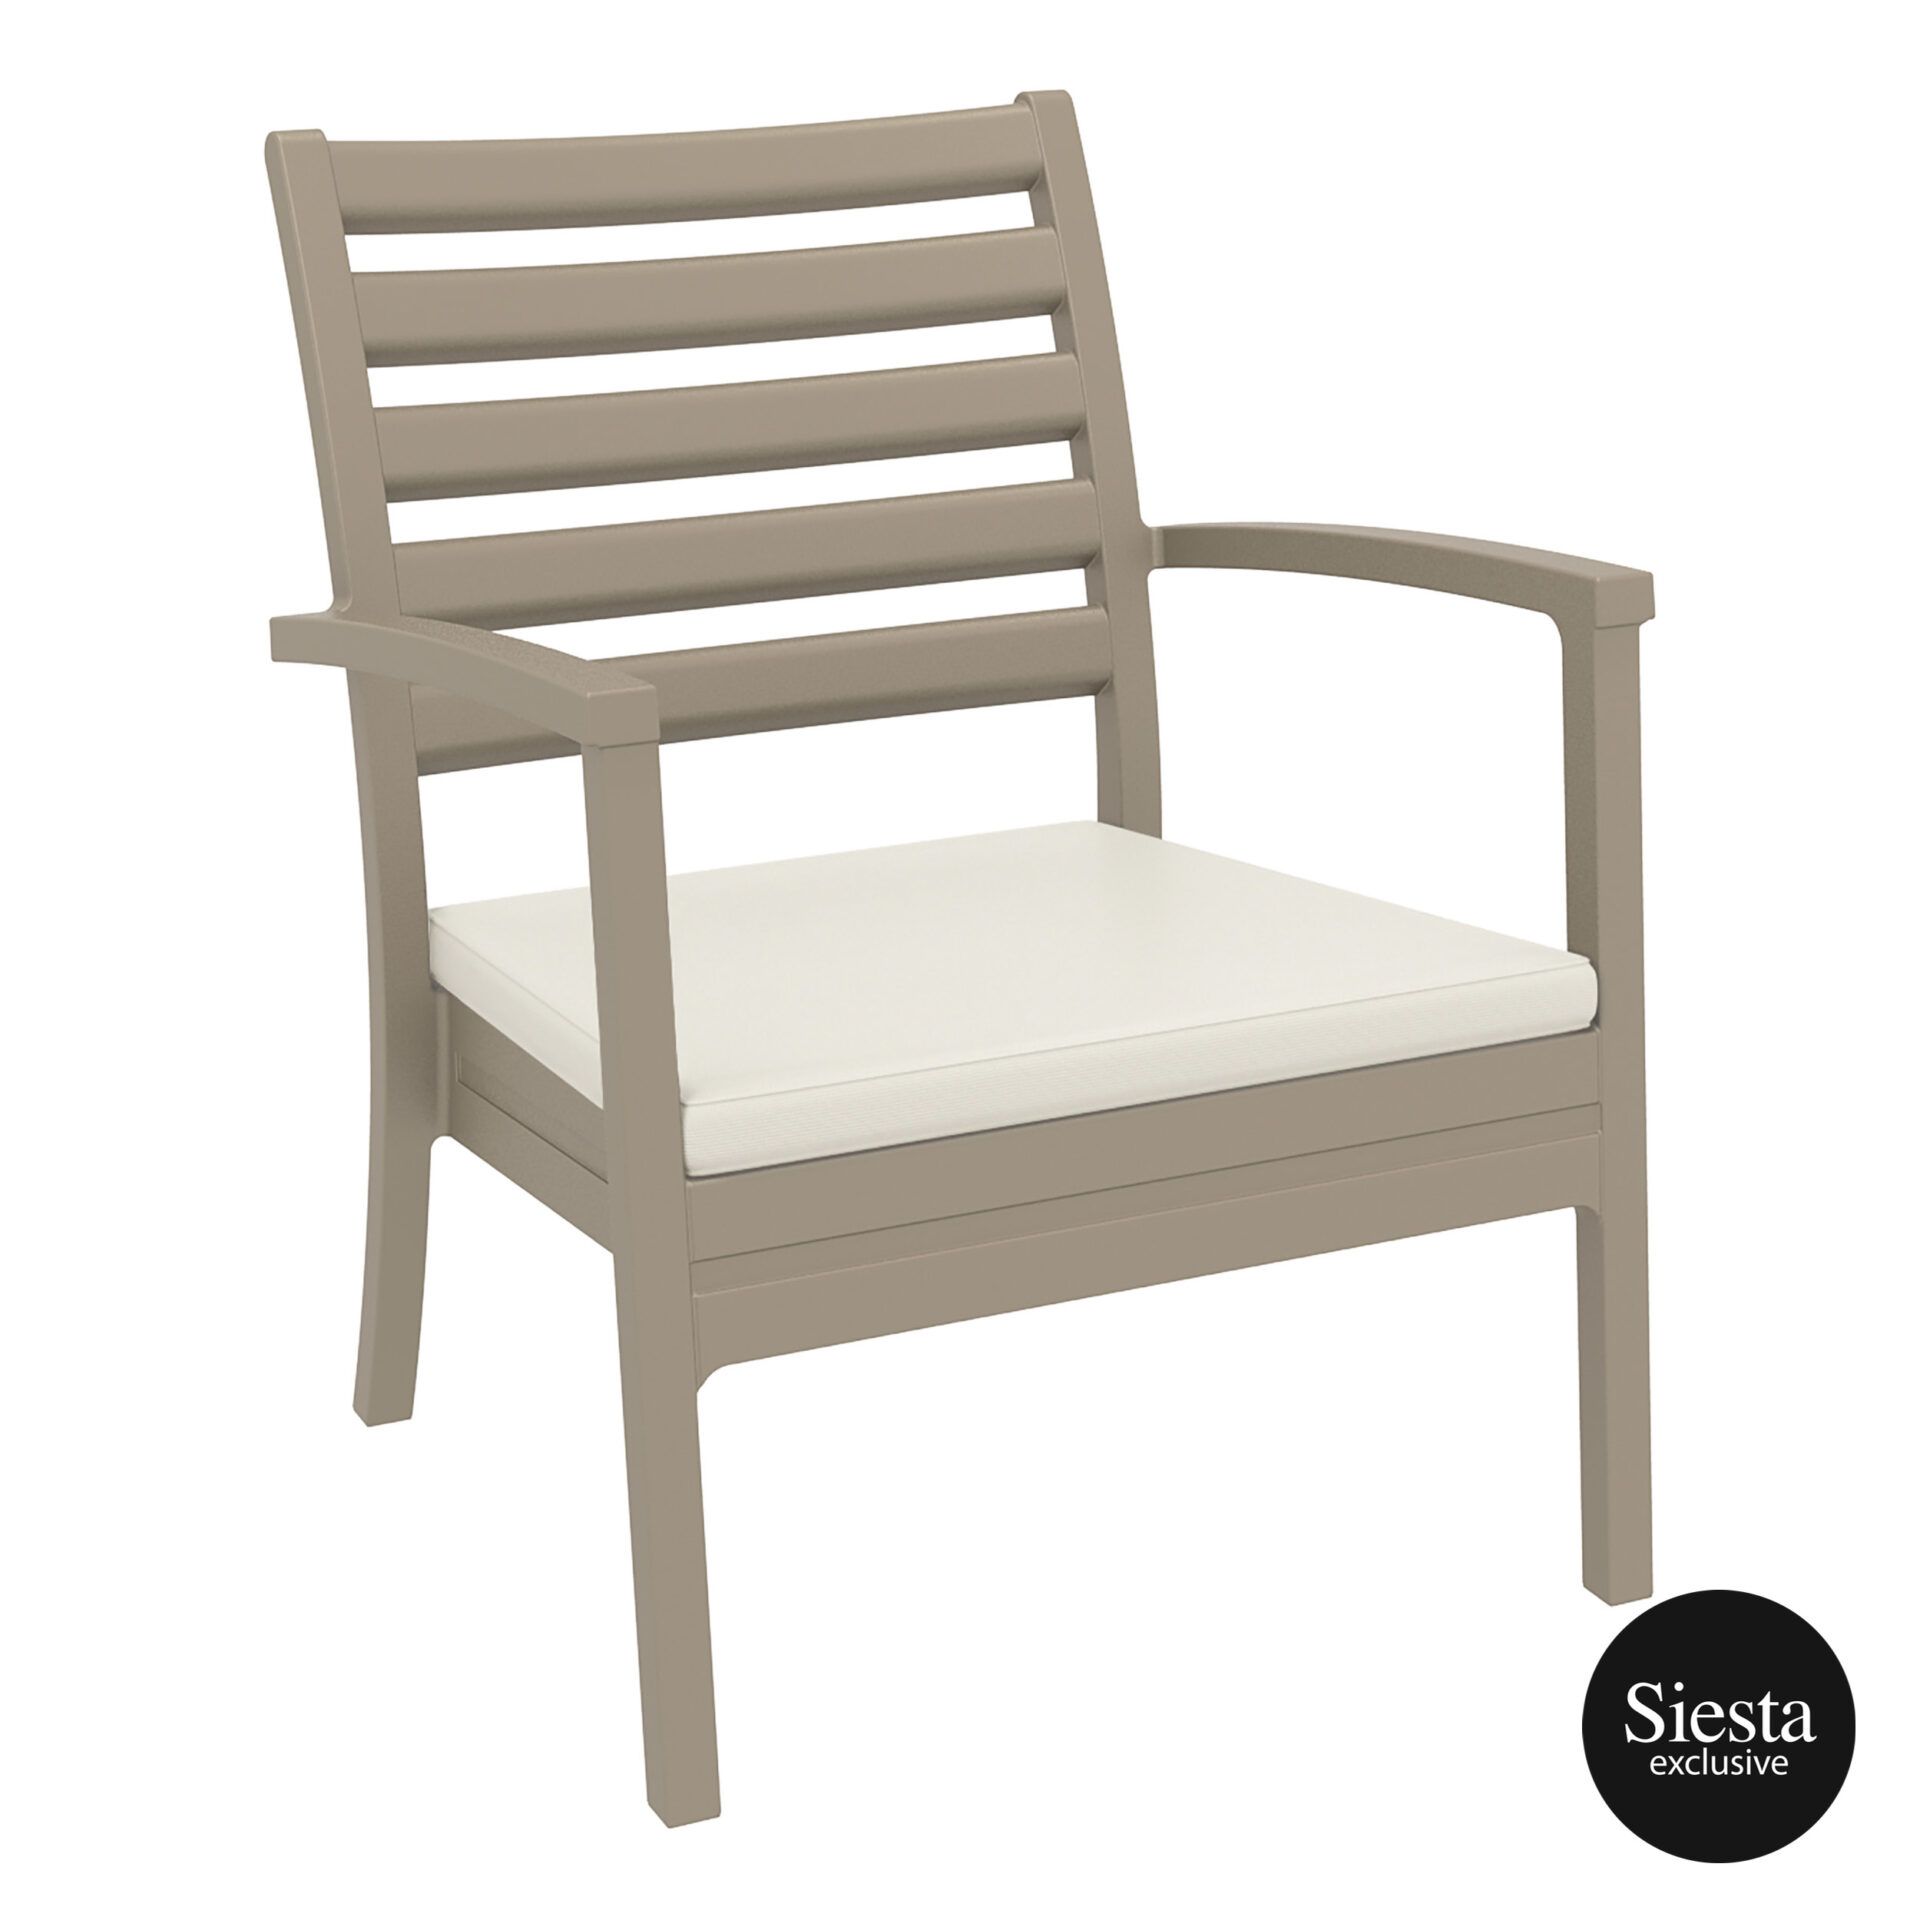 Artemis XL Armchair - Taupe with Beige Seat Cushion